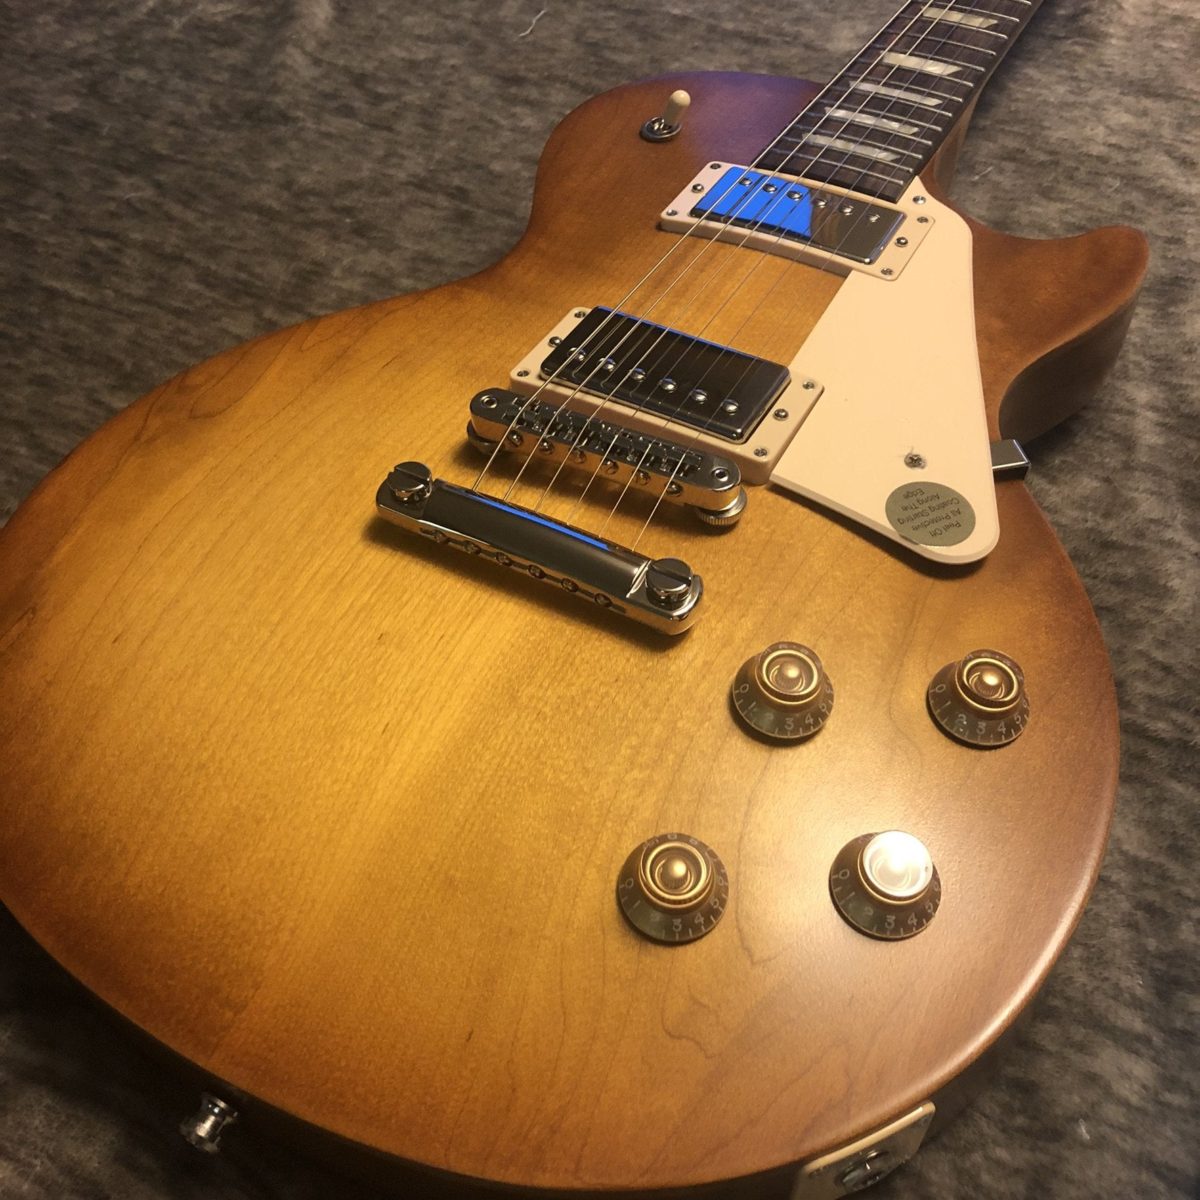 Gibson Les Paul Tribute: The Guitar Holy Grail for under a Grand? The Blogging Musician @ adamharkus.com